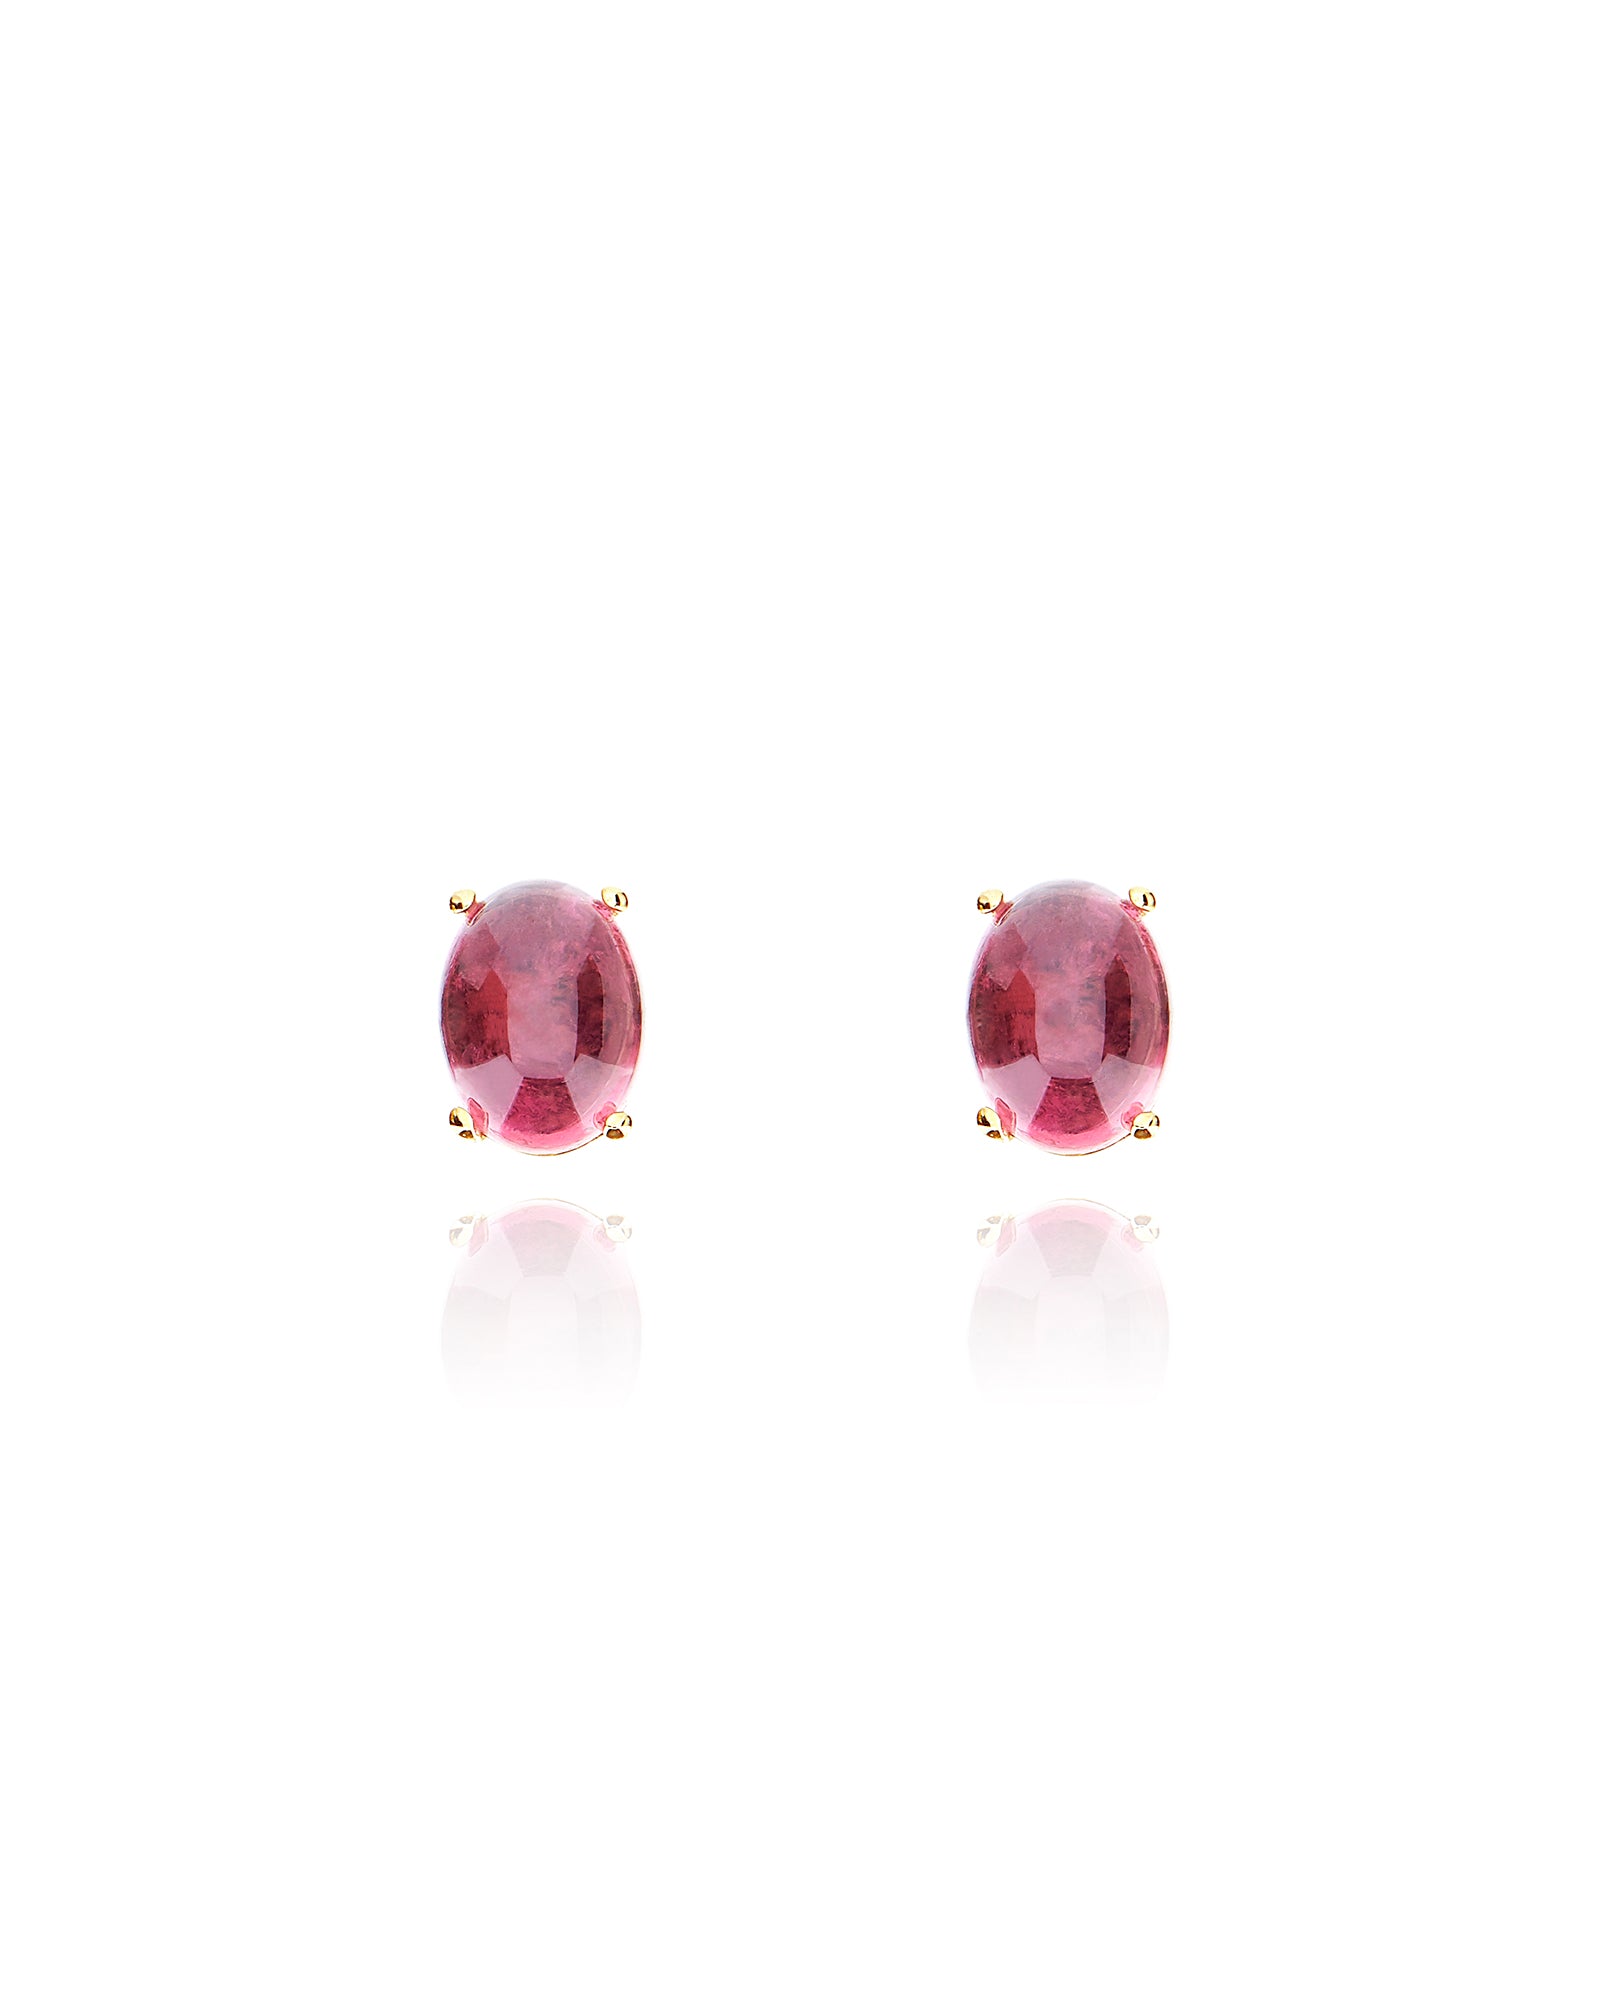 "Tourmalines" Gold and pink tourmaline stud earrings